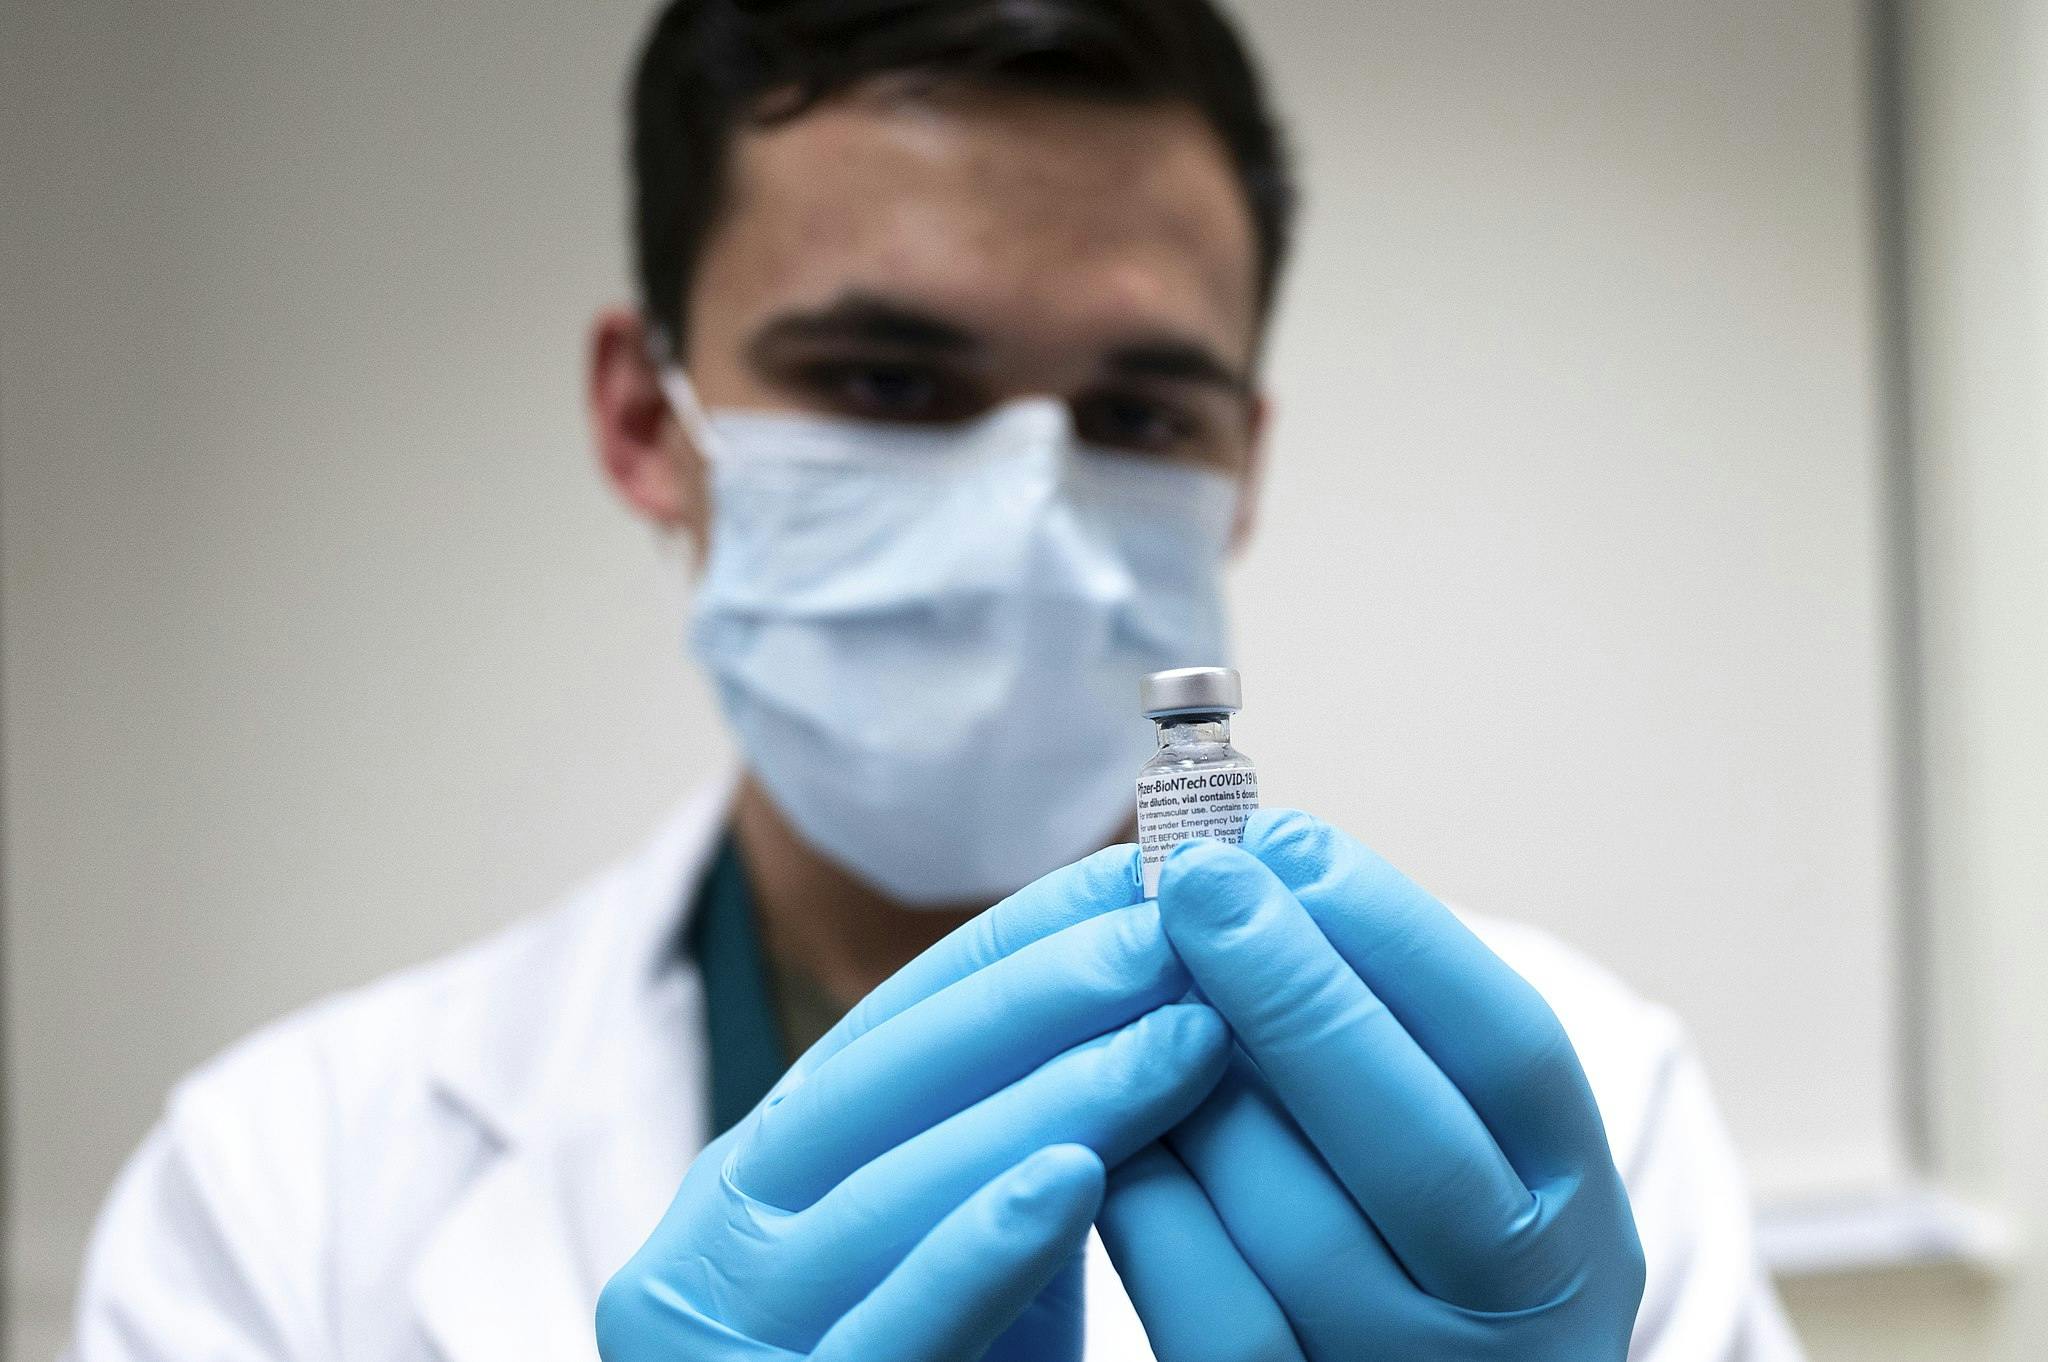  Army Spc. Angel Laureano holds a vial of the COVID-19 vaccine, Walter Reed National Military Medical Center, Bethesda, Md., Dec. 14, 2020. (DoD photo by Lisa Ferdinando)